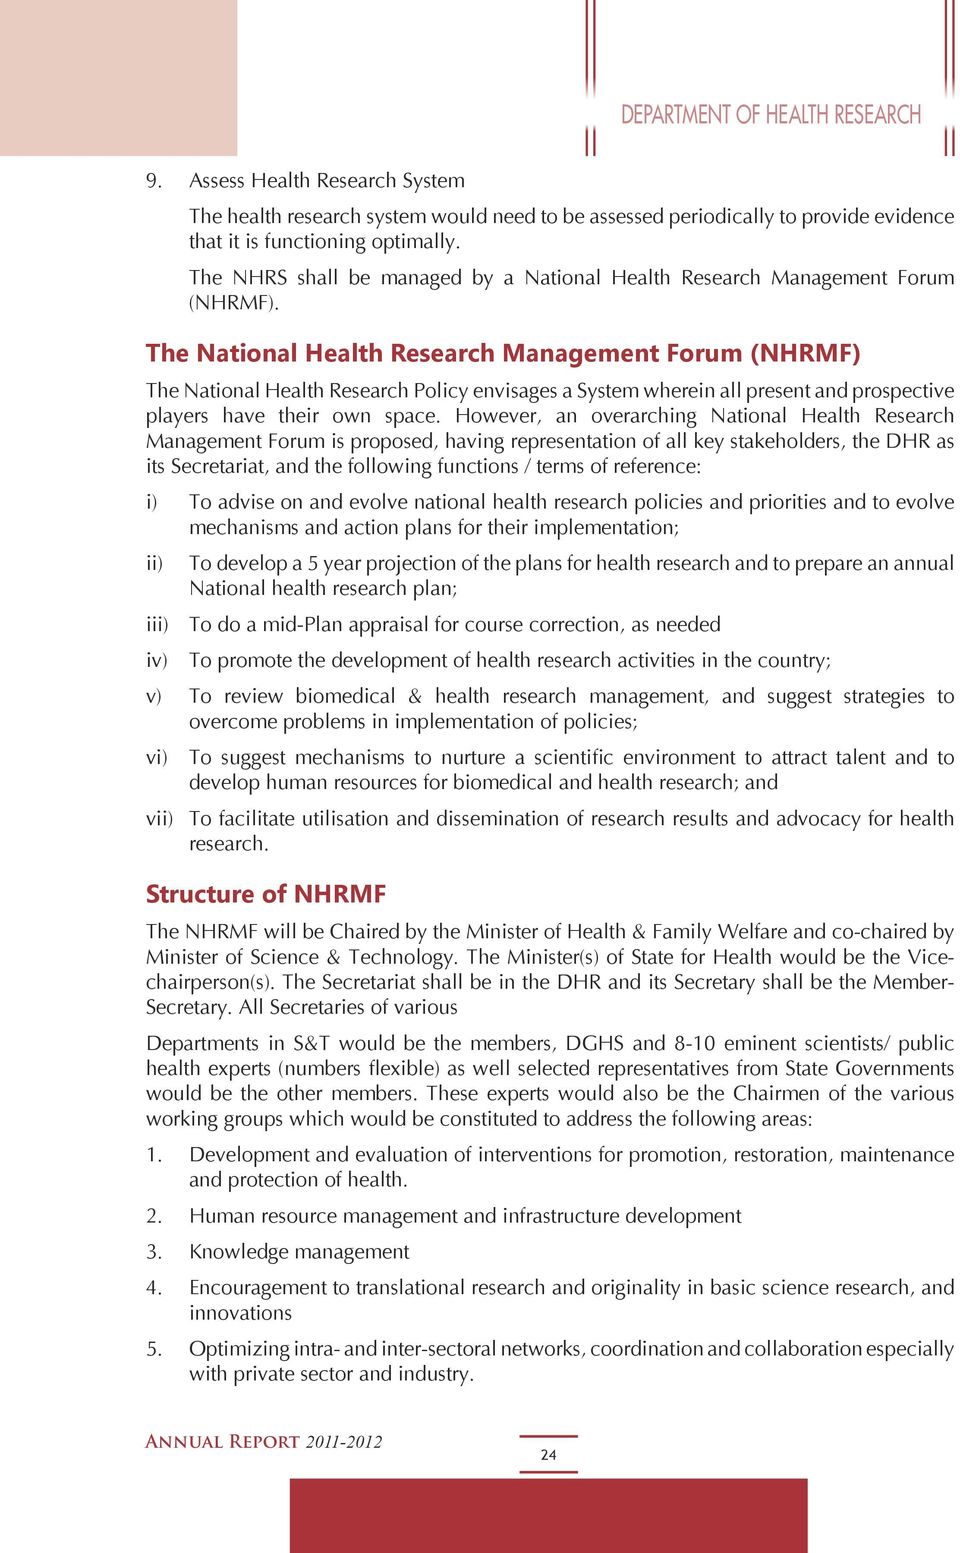 The National Health Research Management Forum (NHRMF) The National Health Research Policy envisages a System wherein all present and prospective players have their own space.